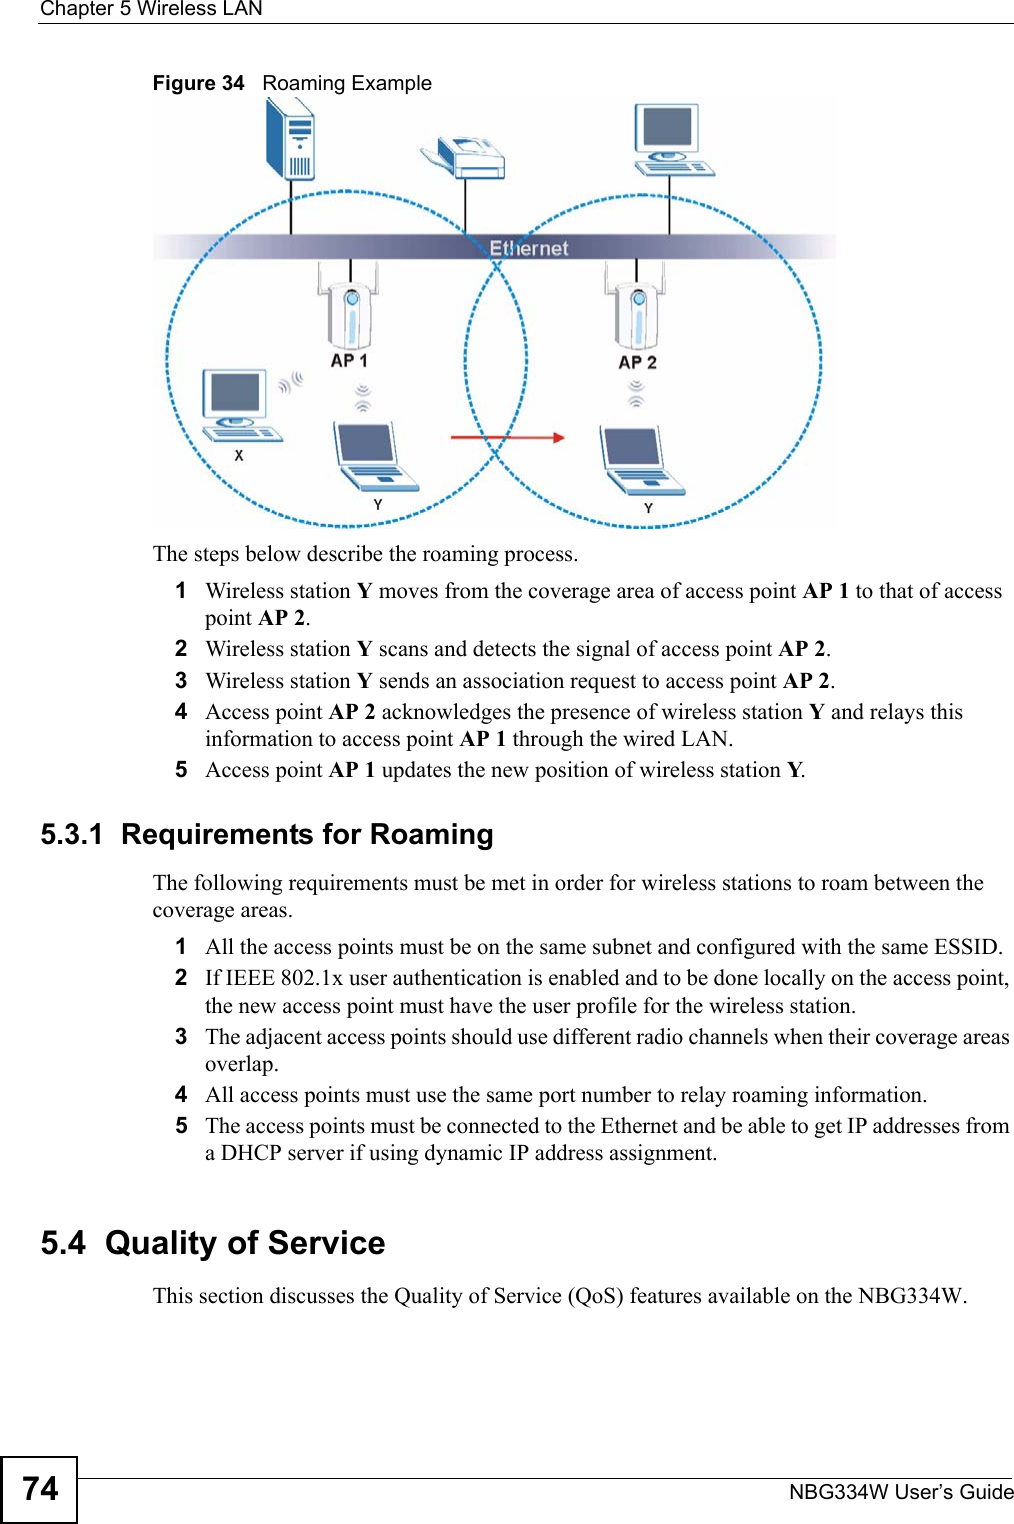 Chapter 5 Wireless LANNBG334W User’s Guide74Figure 34   Roaming ExampleThe steps below describe the roaming process.1Wireless station Y moves from the coverage area of access point AP 1 to that of access point AP 2. 2Wireless station Y scans and detects the signal of access point AP 2. 3Wireless station Y sends an association request to access point AP 2.4Access point AP 2 acknowledges the presence of wireless station Y and relays this information to access point AP 1 through the wired LAN. 5Access point AP 1 updates the new position of wireless station Y.5.3.1  Requirements for RoamingThe following requirements must be met in order for wireless stations to roam between the coverage areas. 1All the access points must be on the same subnet and configured with the same ESSID. 2If IEEE 802.1x user authentication is enabled and to be done locally on the access point, the new access point must have the user profile for the wireless station.3The adjacent access points should use different radio channels when their coverage areas overlap. 4All access points must use the same port number to relay roaming information. 5The access points must be connected to the Ethernet and be able to get IP addresses from a DHCP server if using dynamic IP address assignment. 5.4  Quality of ServiceThis section discusses the Quality of Service (QoS) features available on the NBG334W.